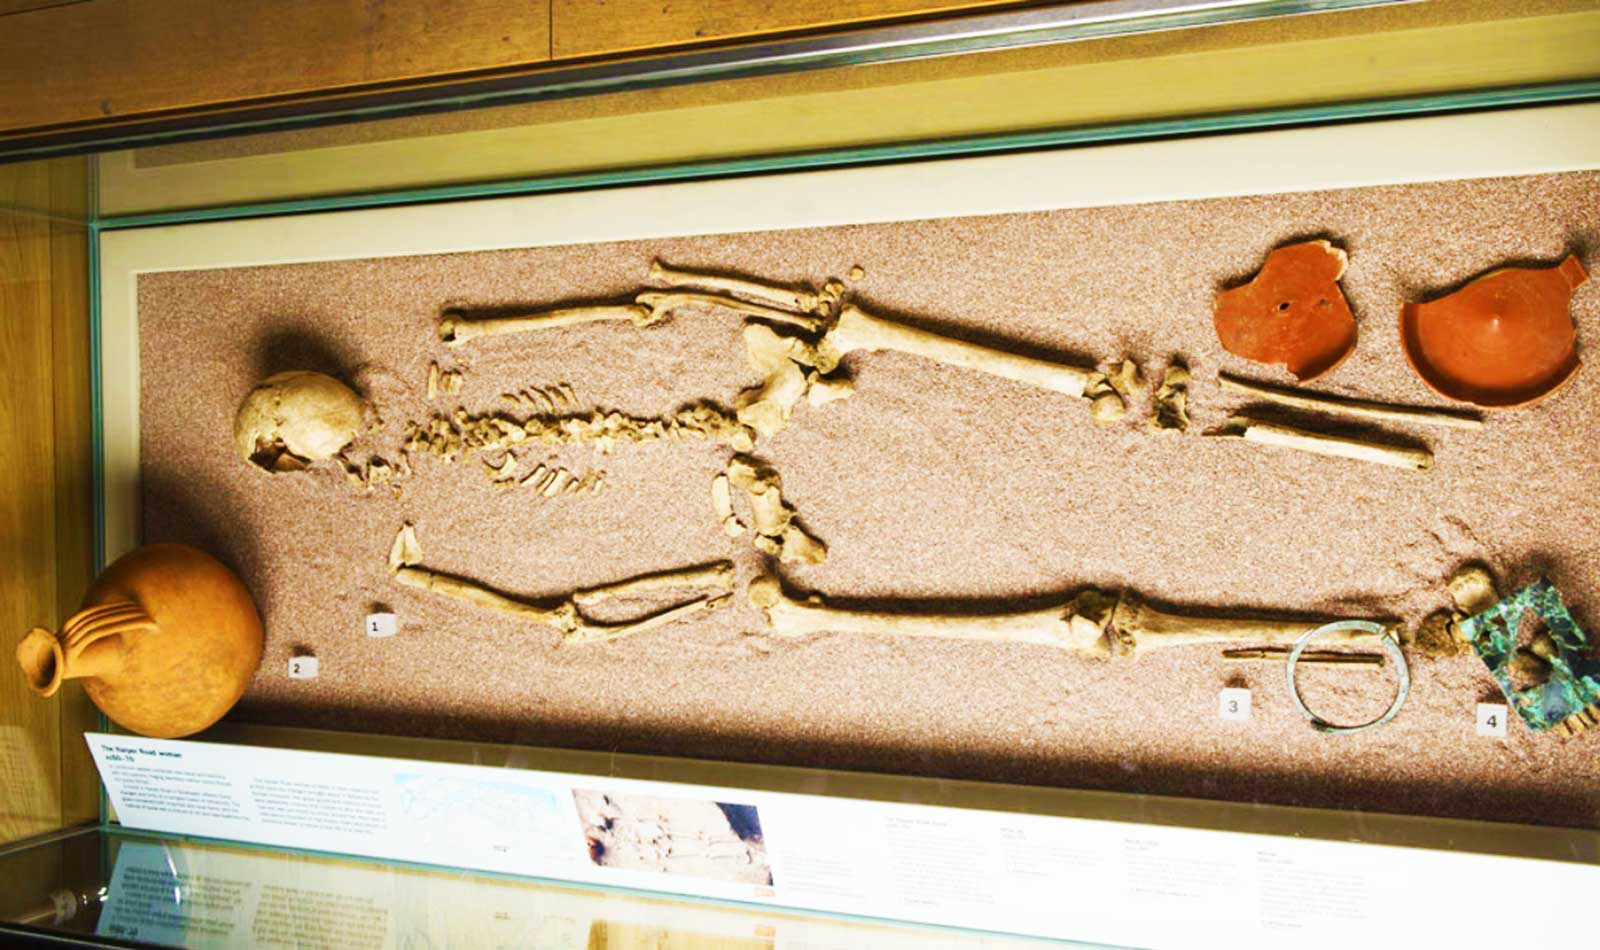 The Harper Road remains on display in the Museum of London